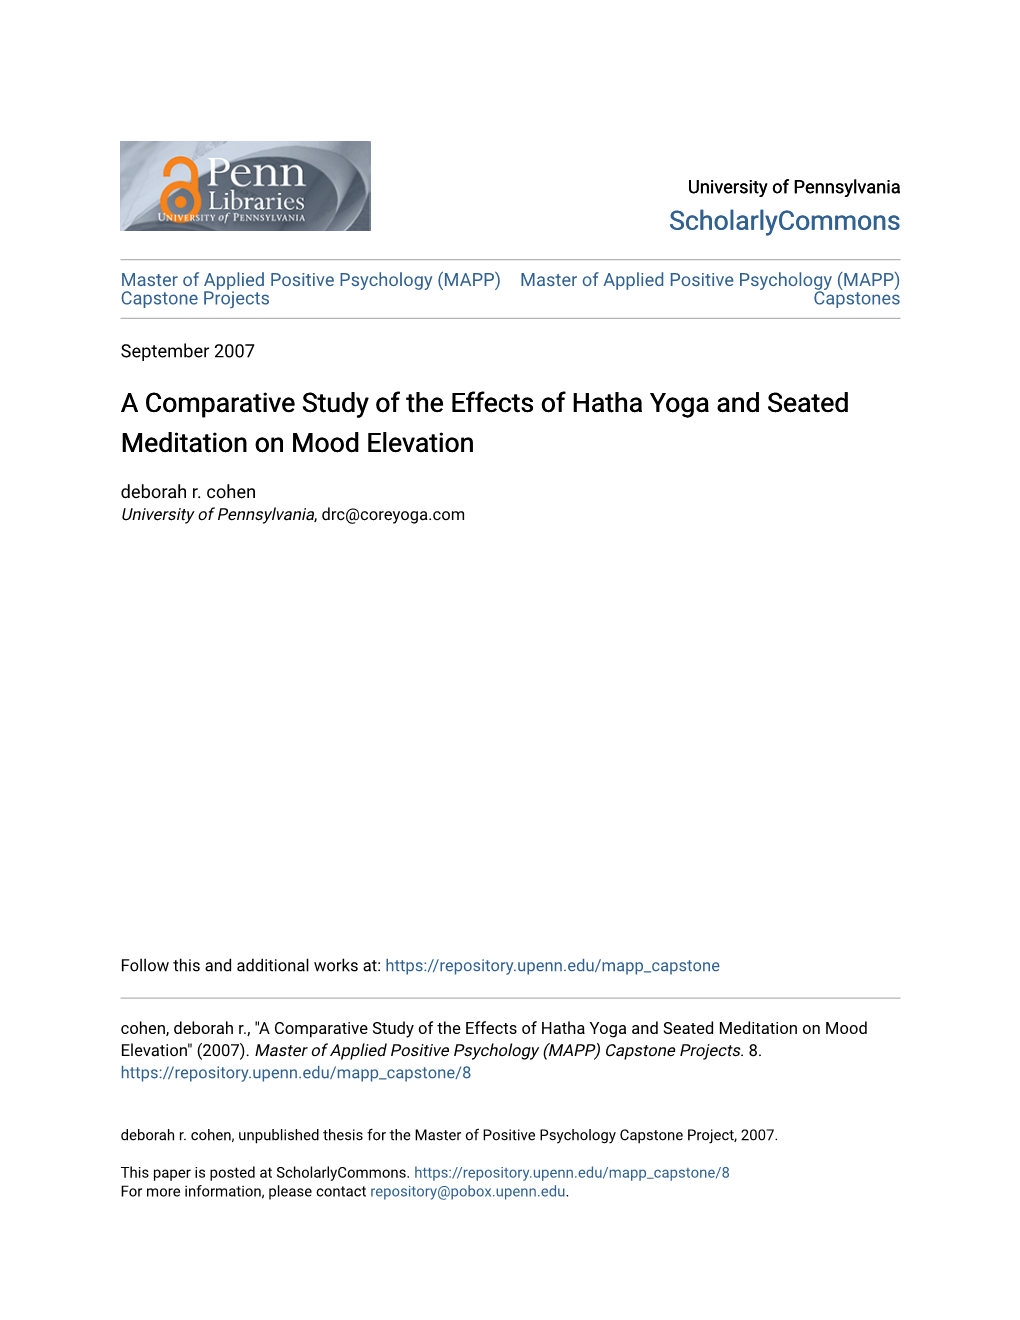 A Comparative Study of the Effects of Hatha Yoga and Seated Meditation on Mood Elevation Deborah R